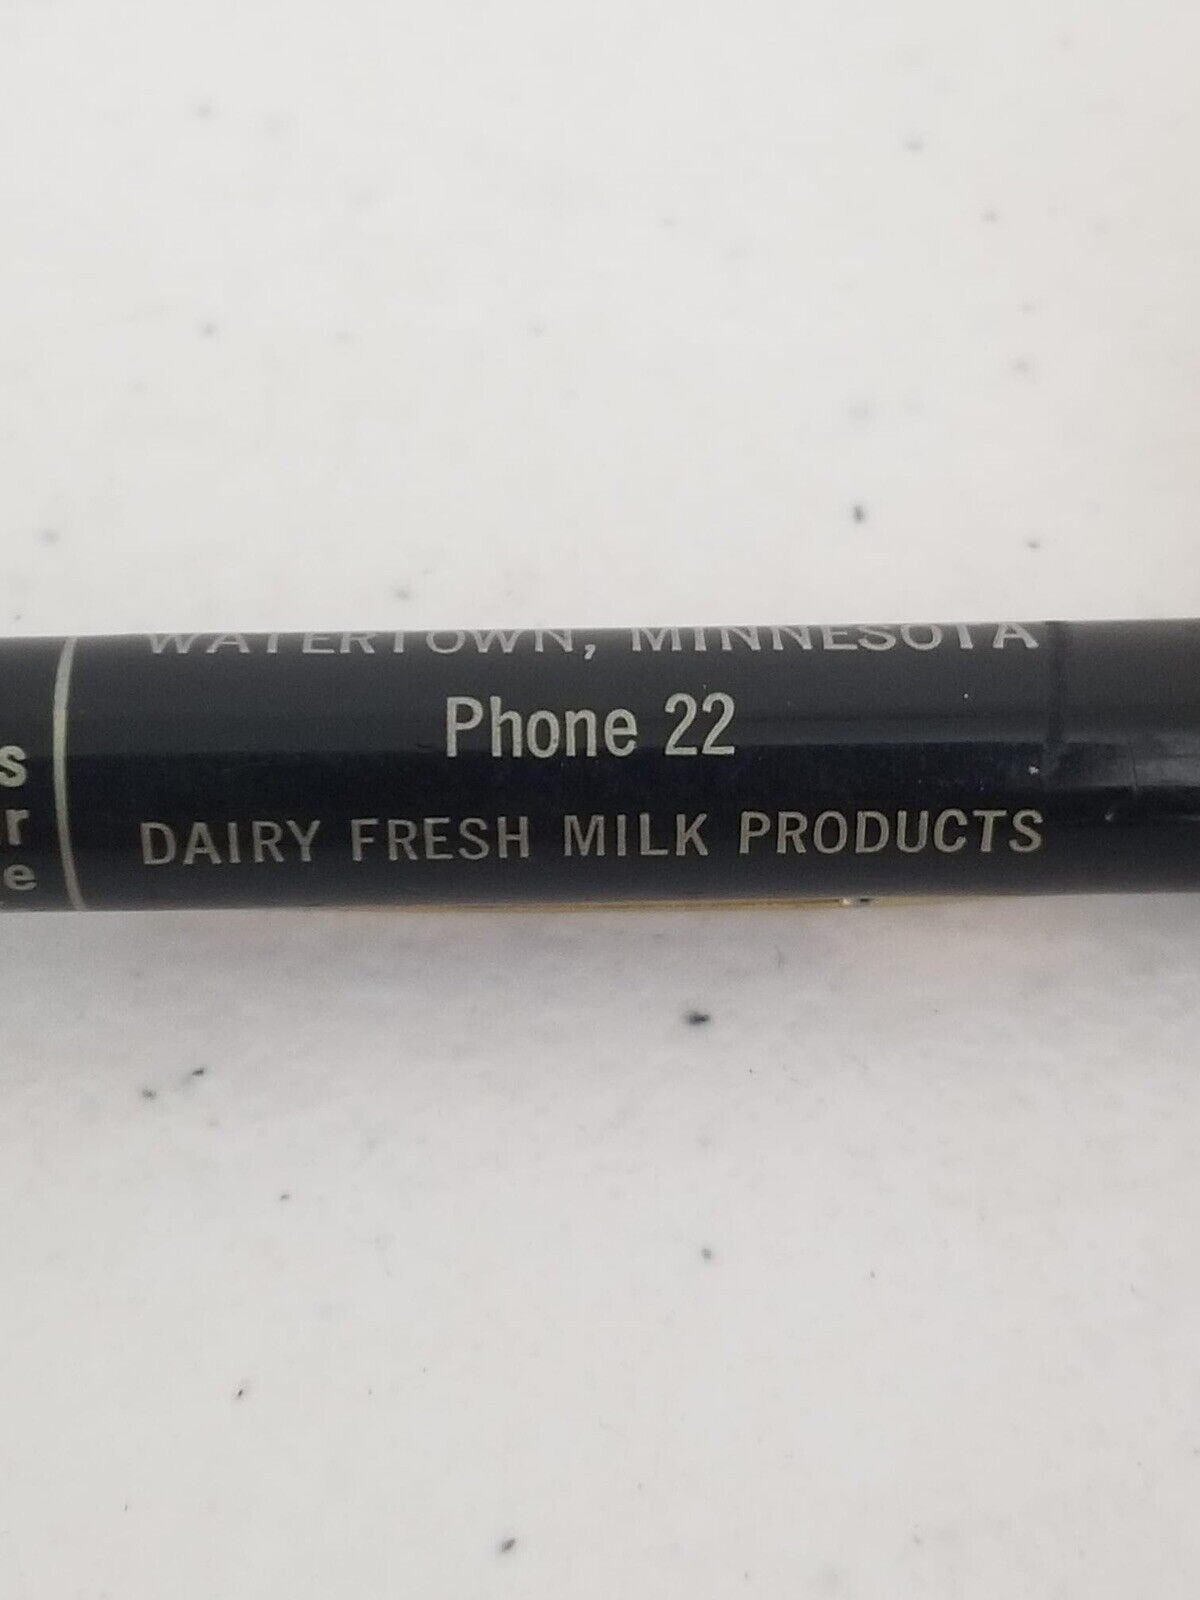 Vintage Redipoint Mechanical Pencil - Dairy Fresh Milk Products Advertising, Watertown, MN - TreasuTiques